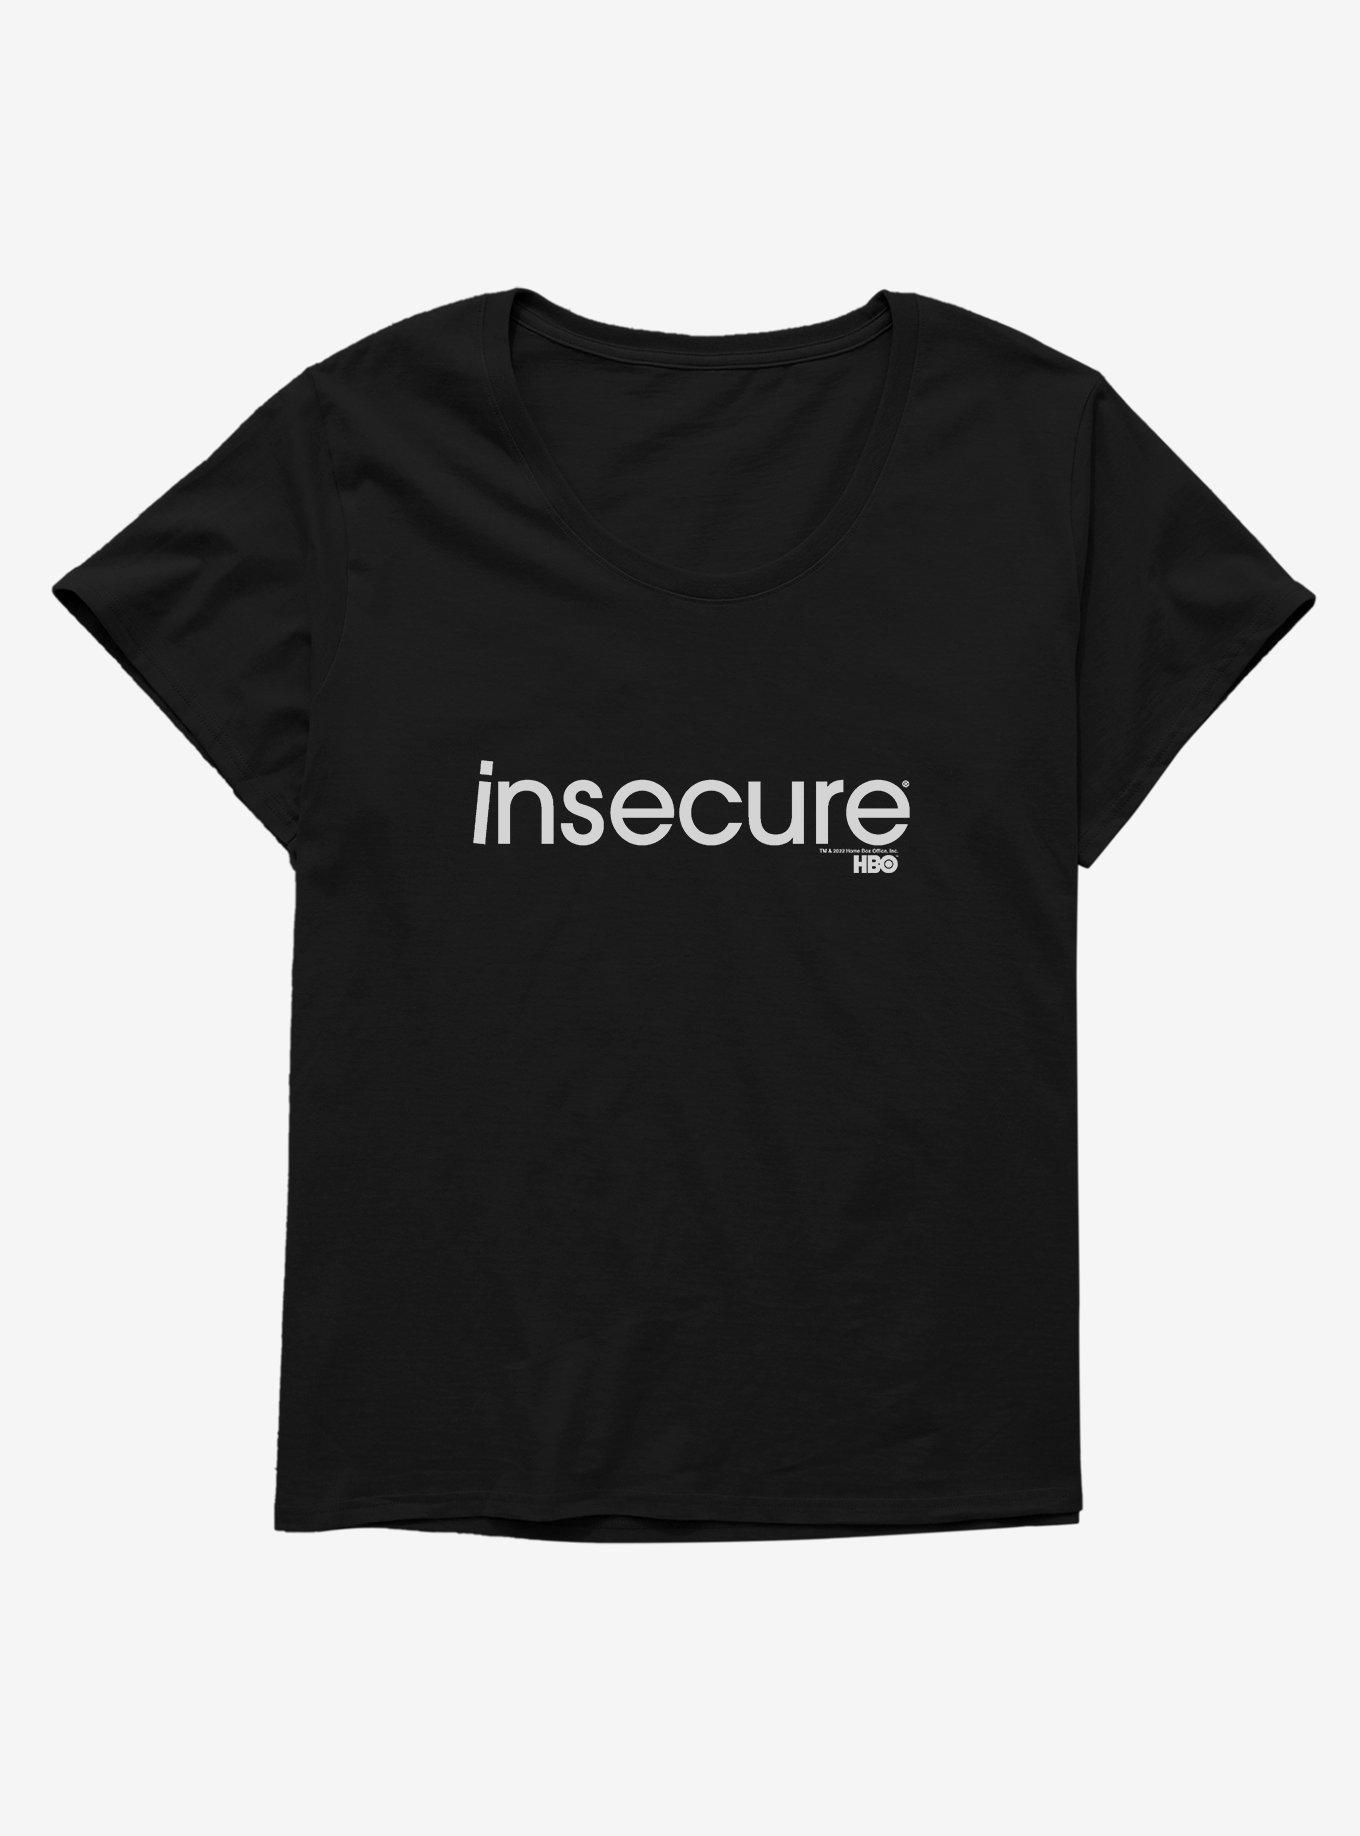 Insecure Logo Girls T-Shirt Plus